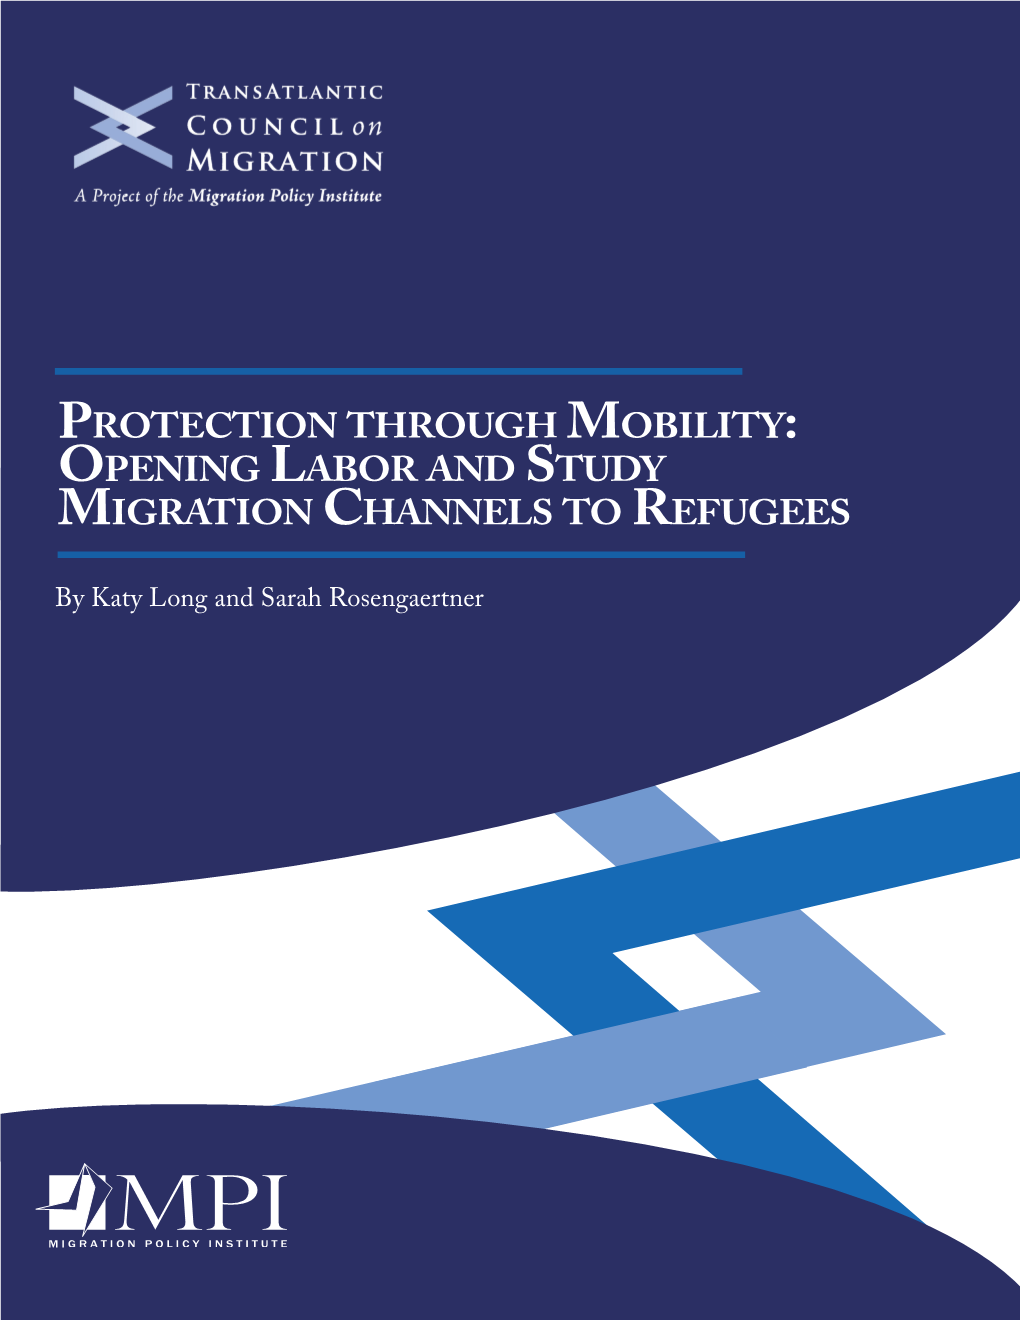 Protection Through Mobility: Opening Labor and Study Migration Channels to Refugees